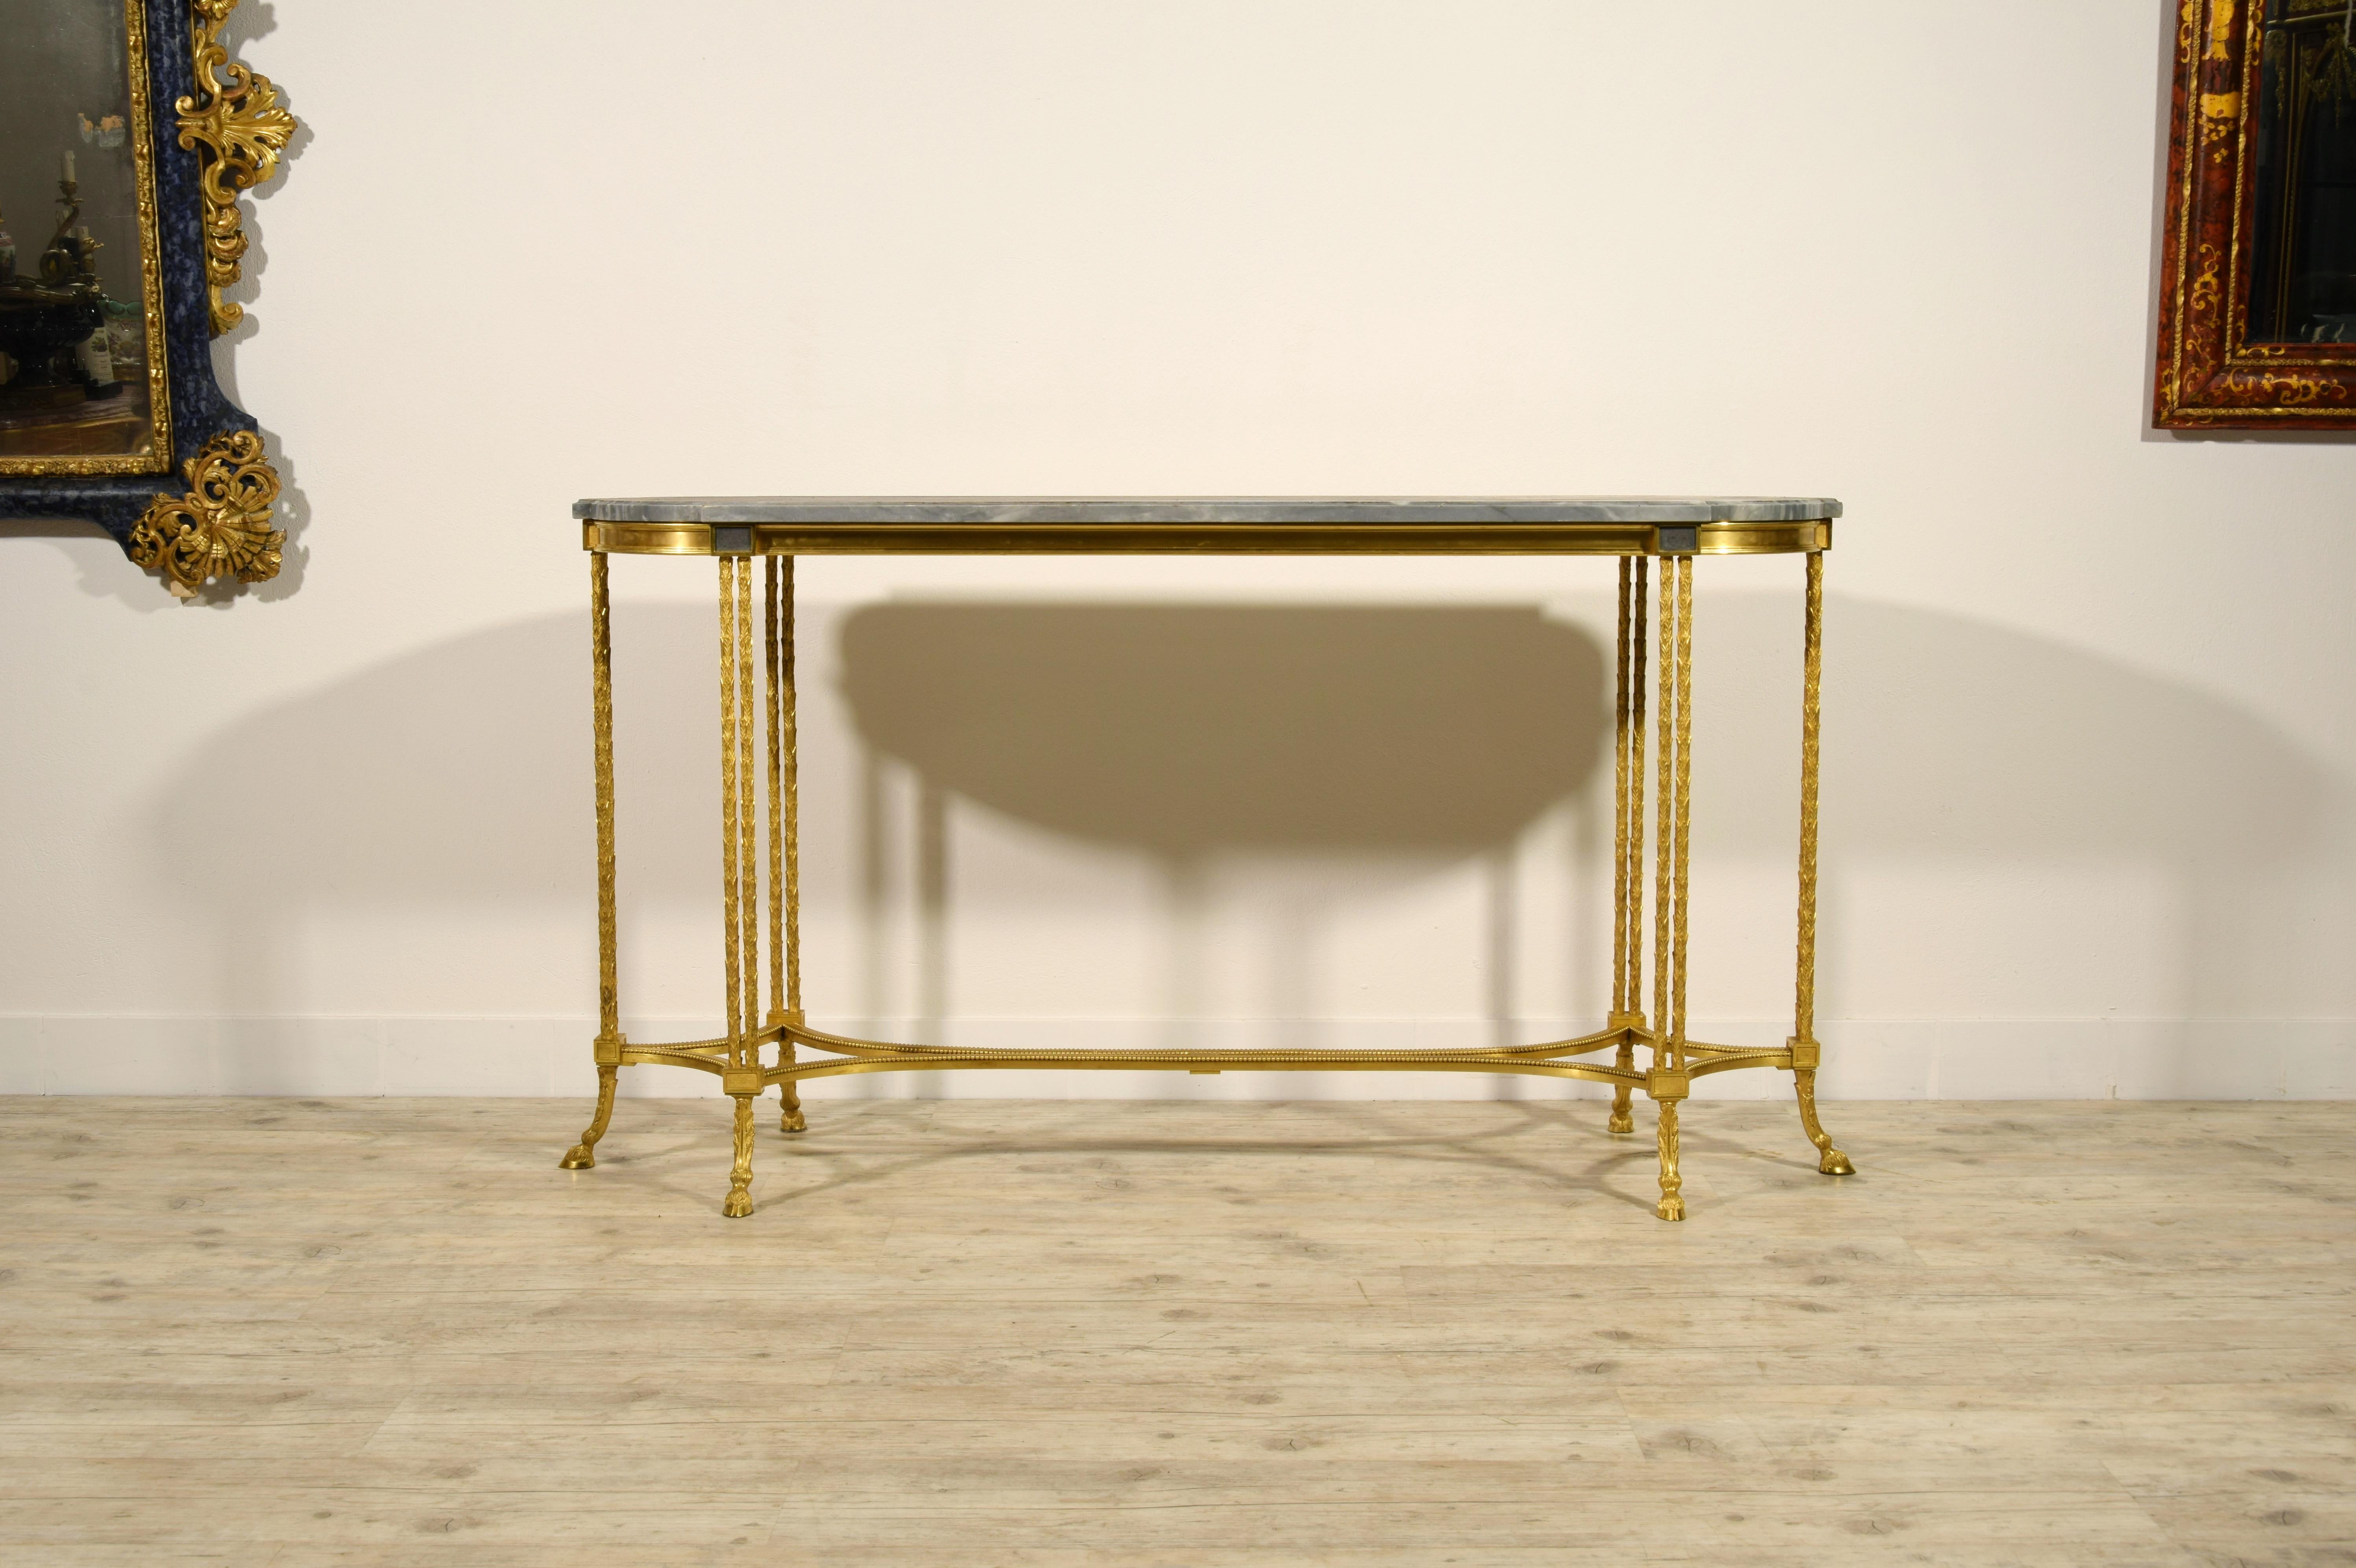 20th century, French Gilt Bronze Console Table by Maison Baguès  For Sale 4